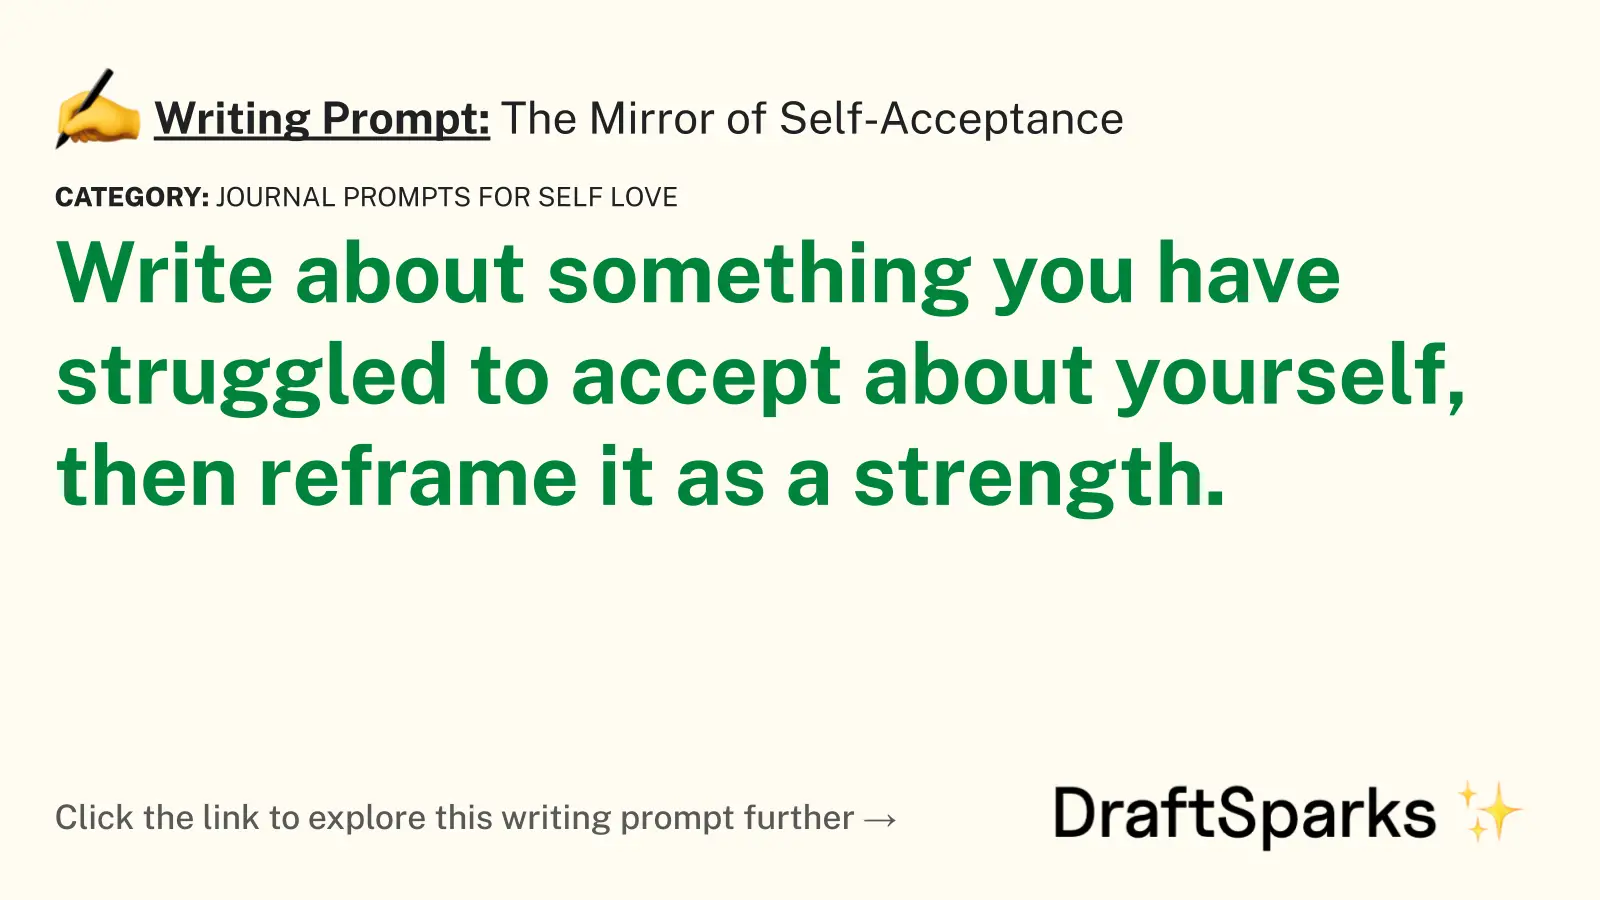 The Mirror of Self-Acceptance